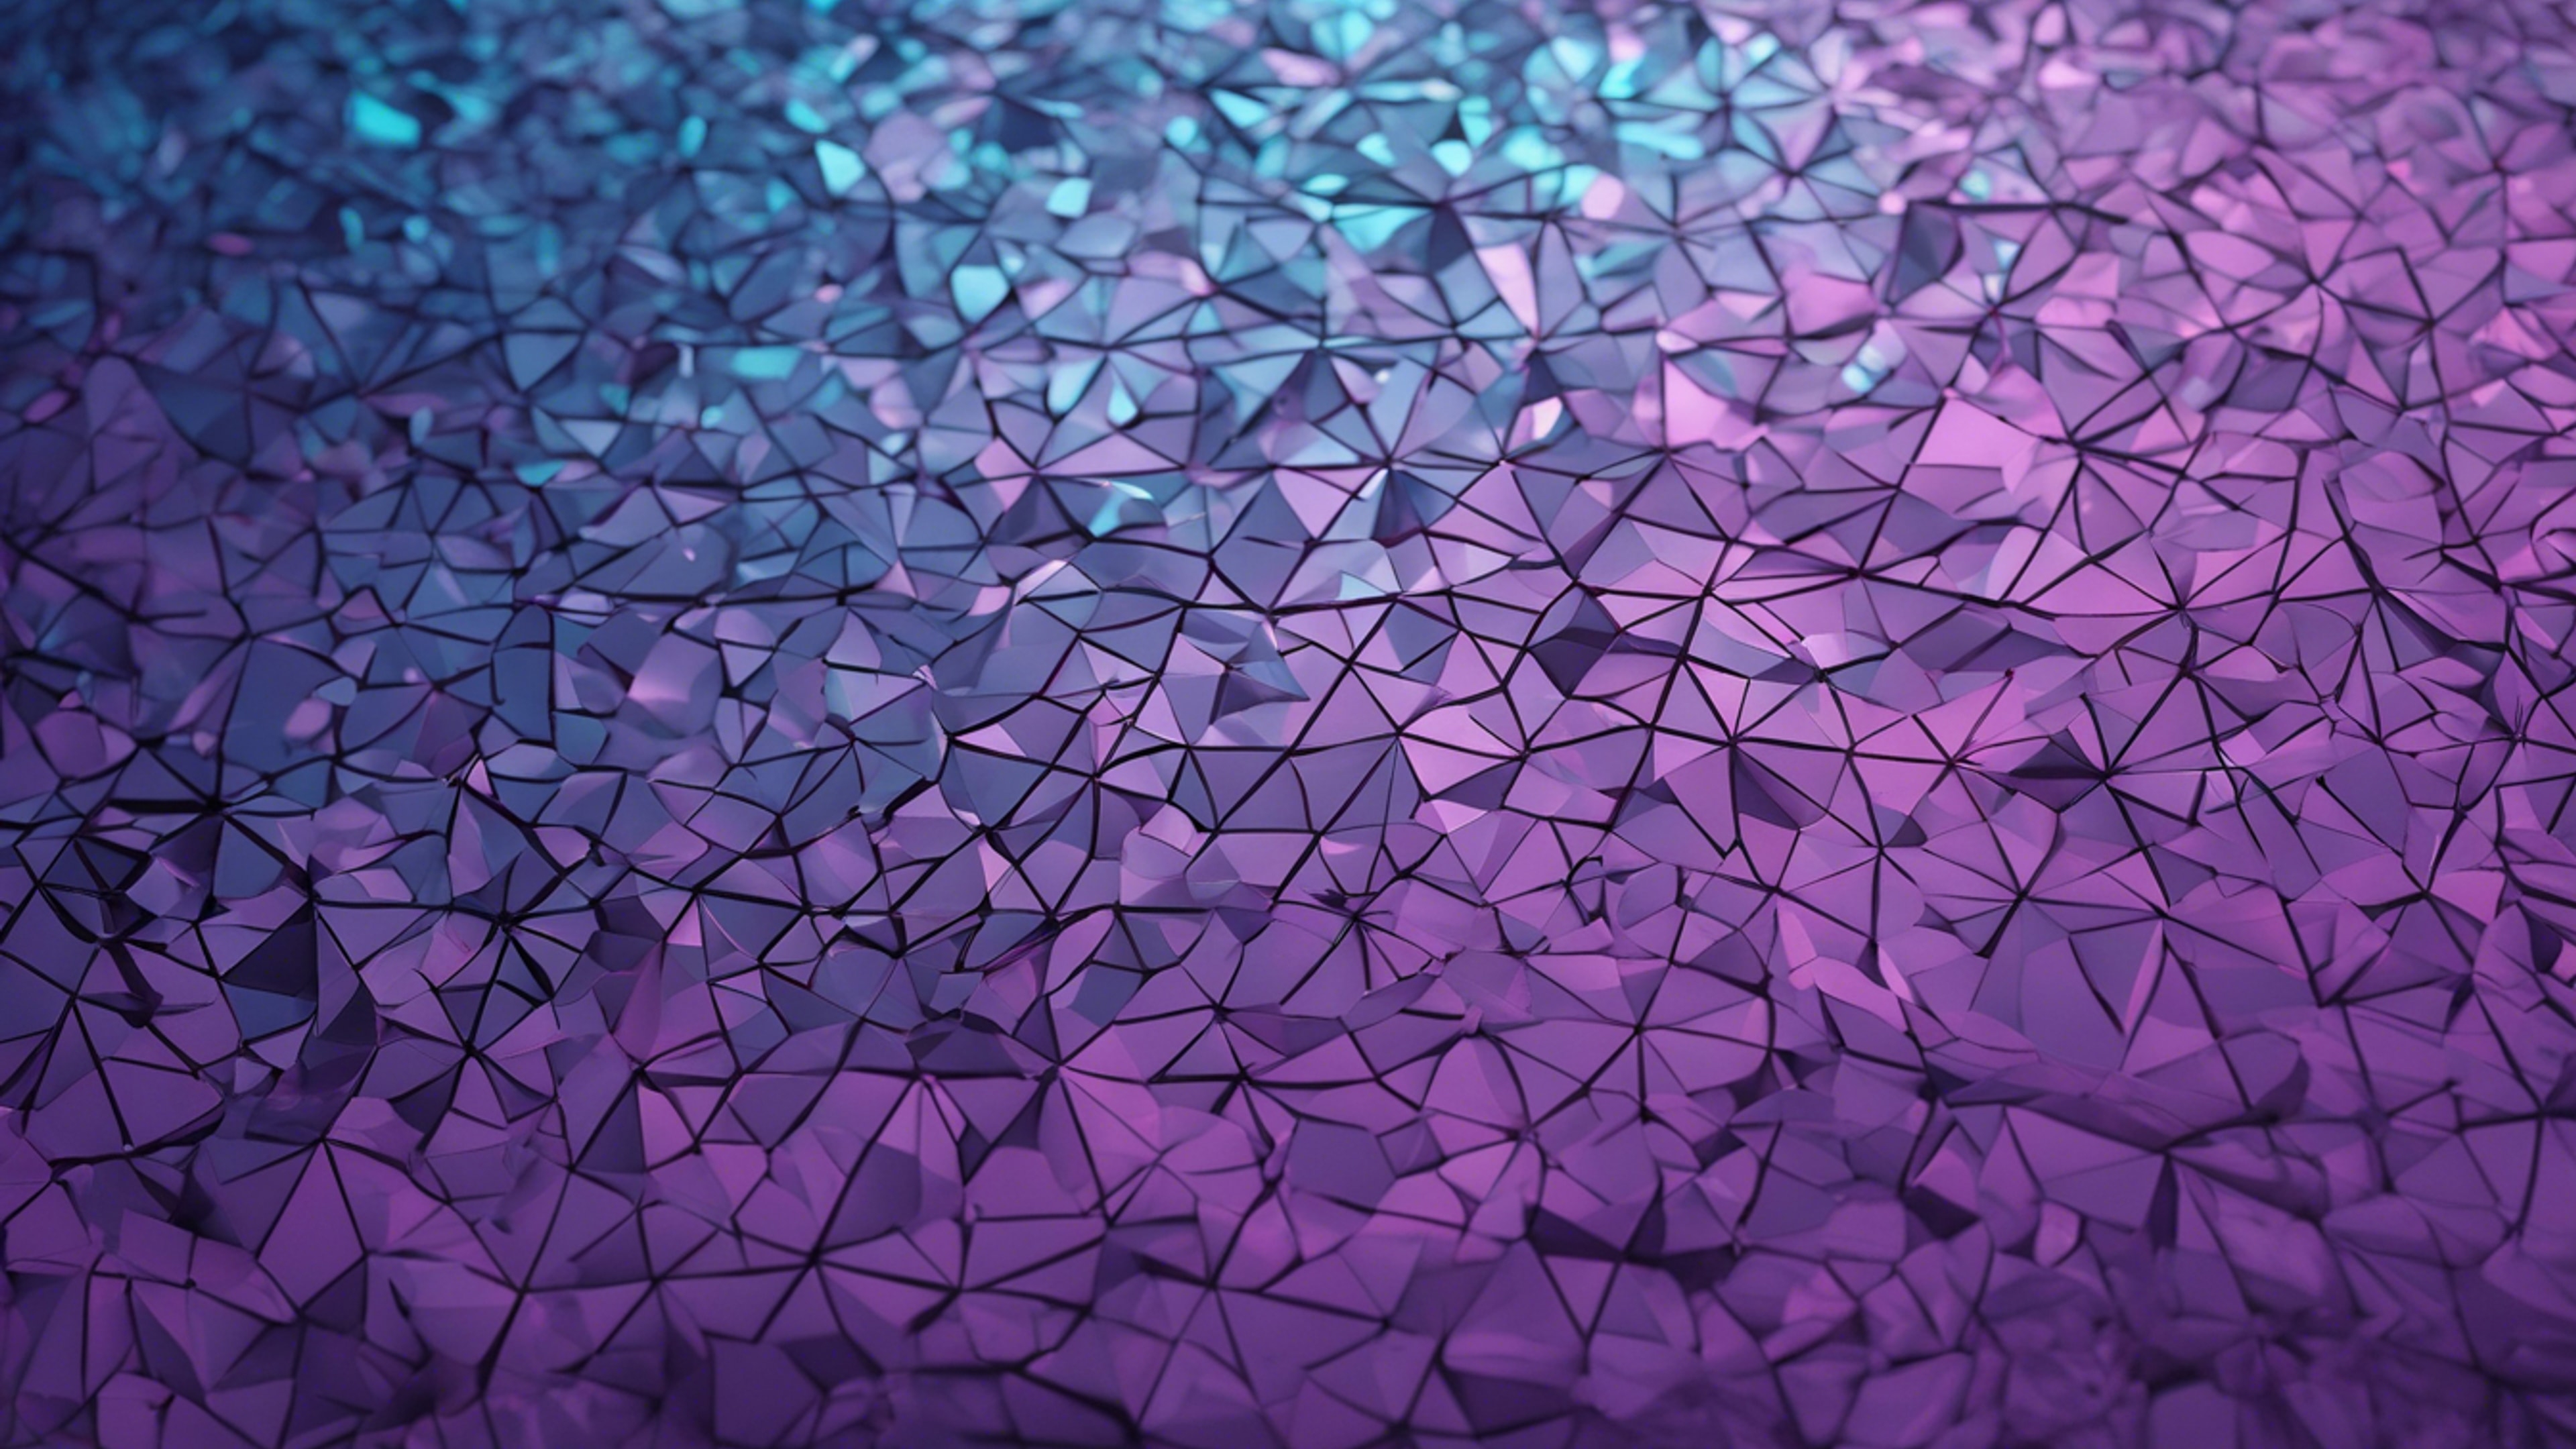 A minimalistic geometric pattern with gradients of cool blues and rich purples. Wallpaper[0965c8f37dc94faa9227]